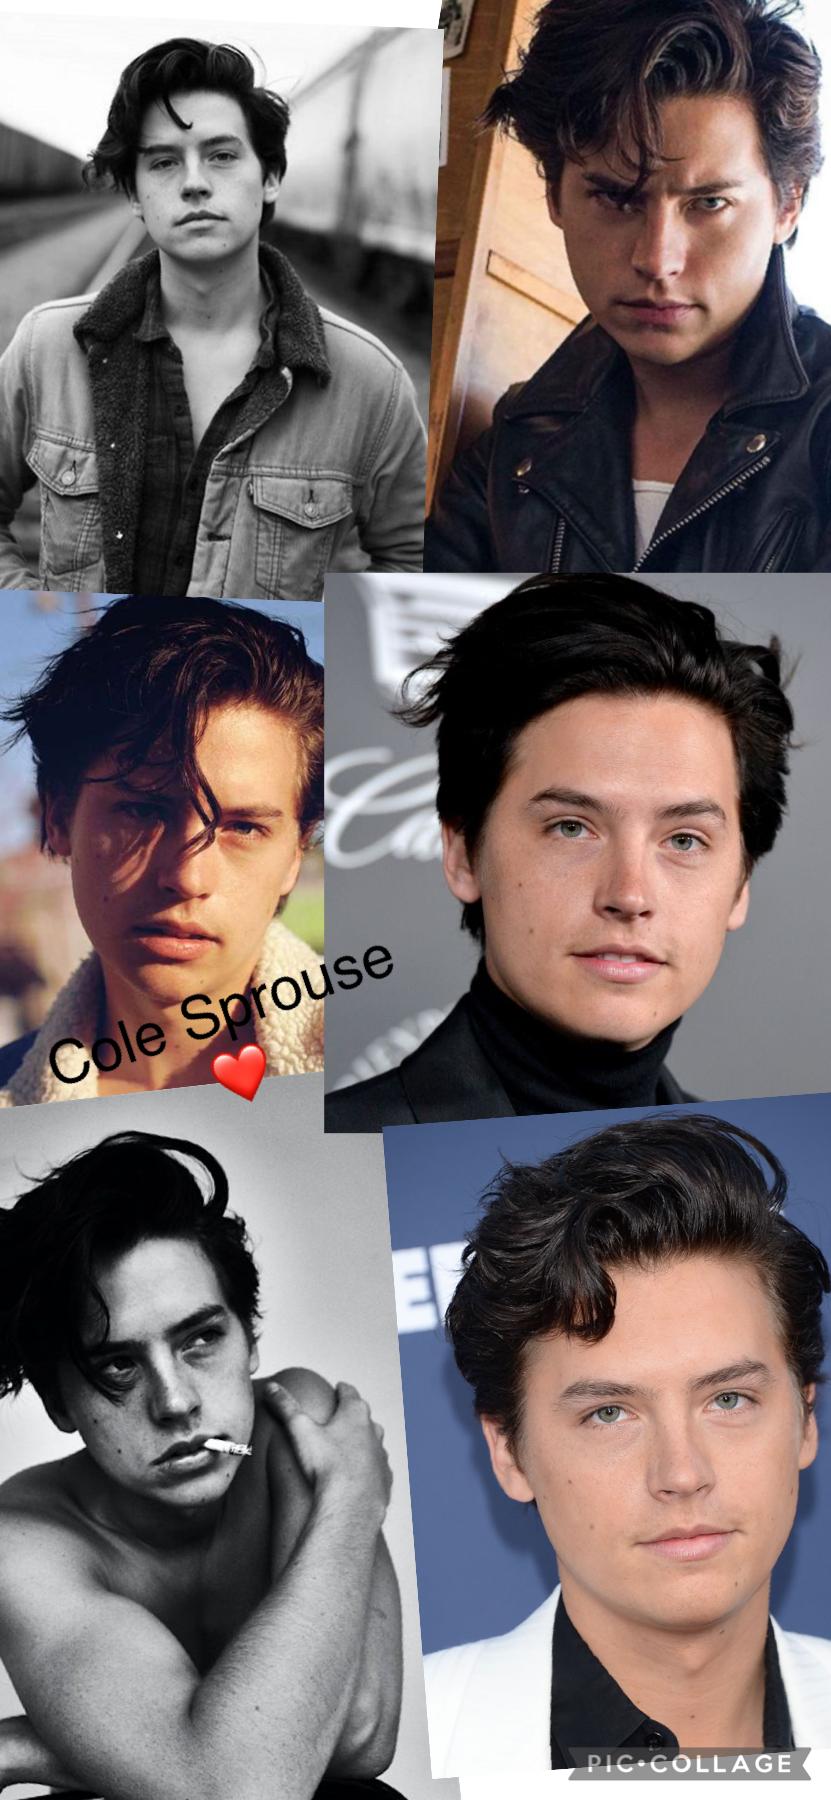 Cole sprouse❤️ riverdale, Zac et Cody❤️